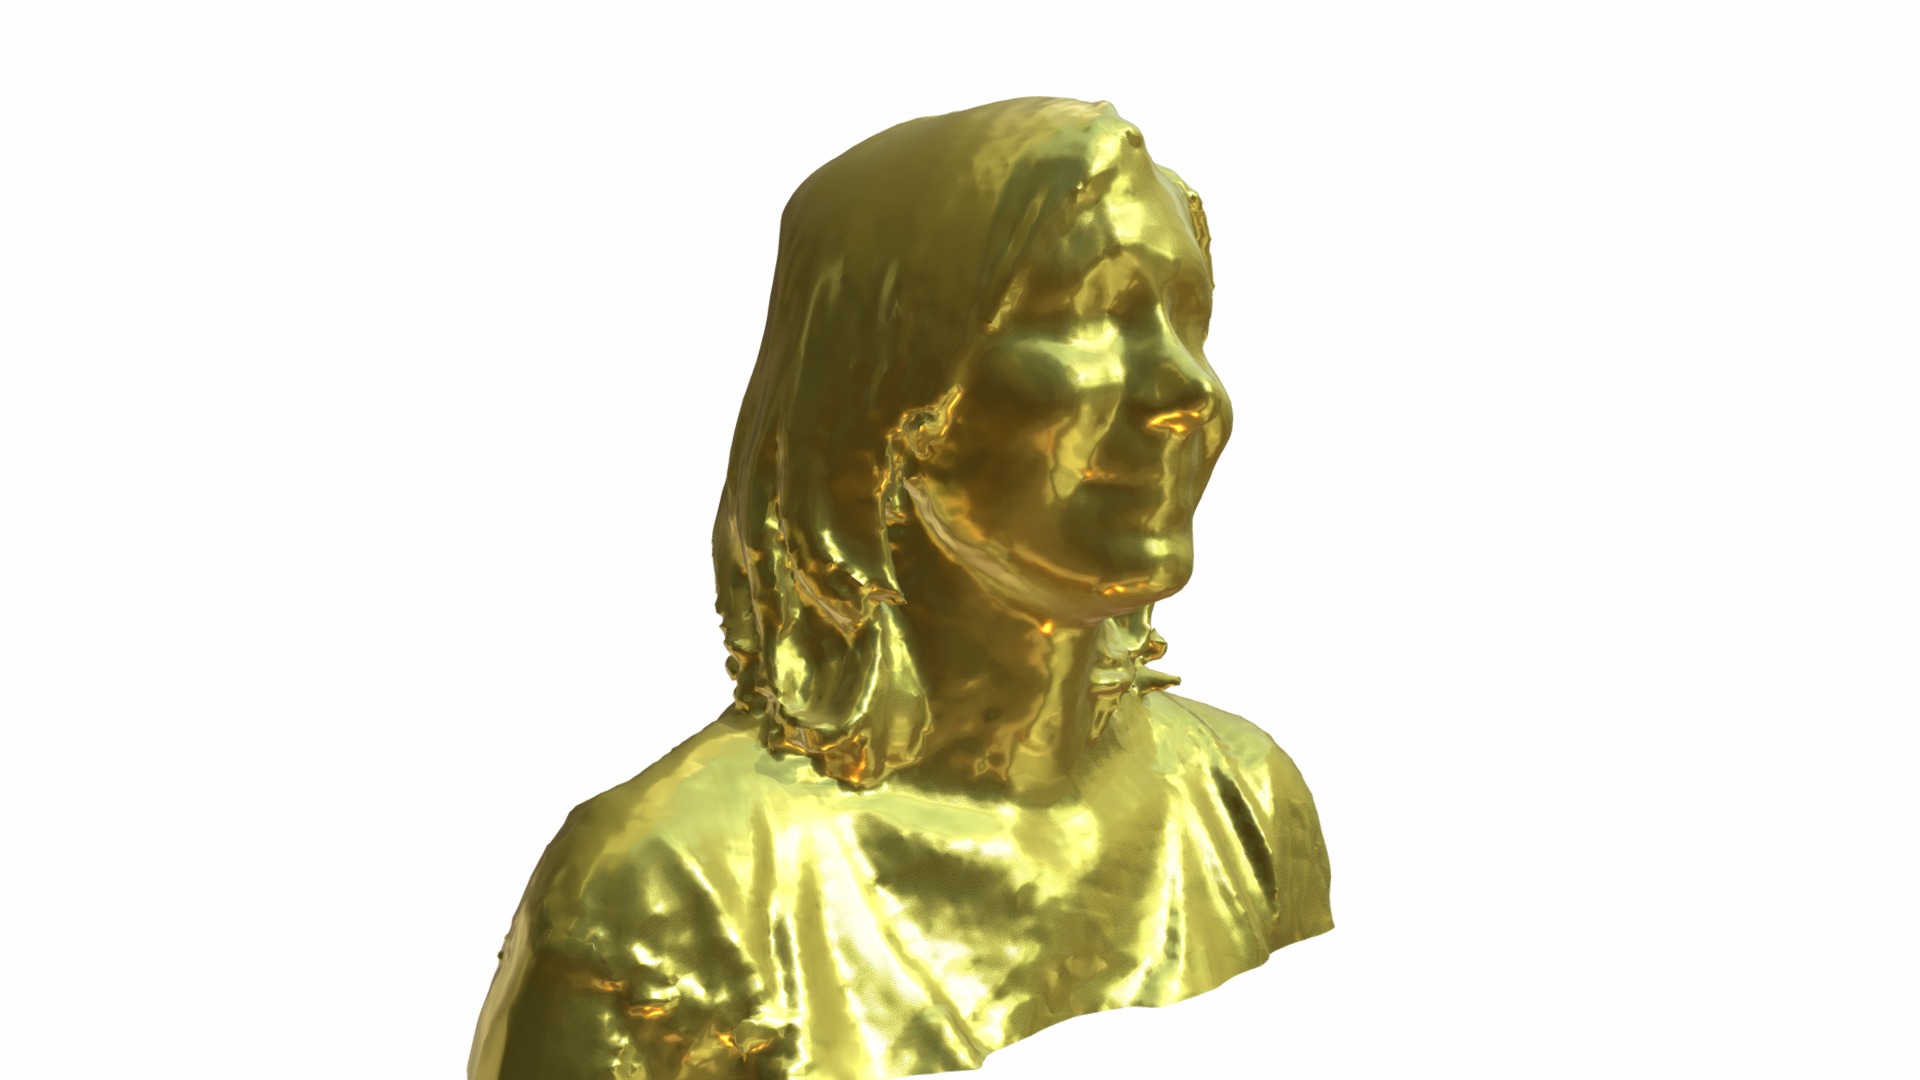 3D model Veronika - This is a 3D model of the Veronika. The 3D model is about a statue of a person.